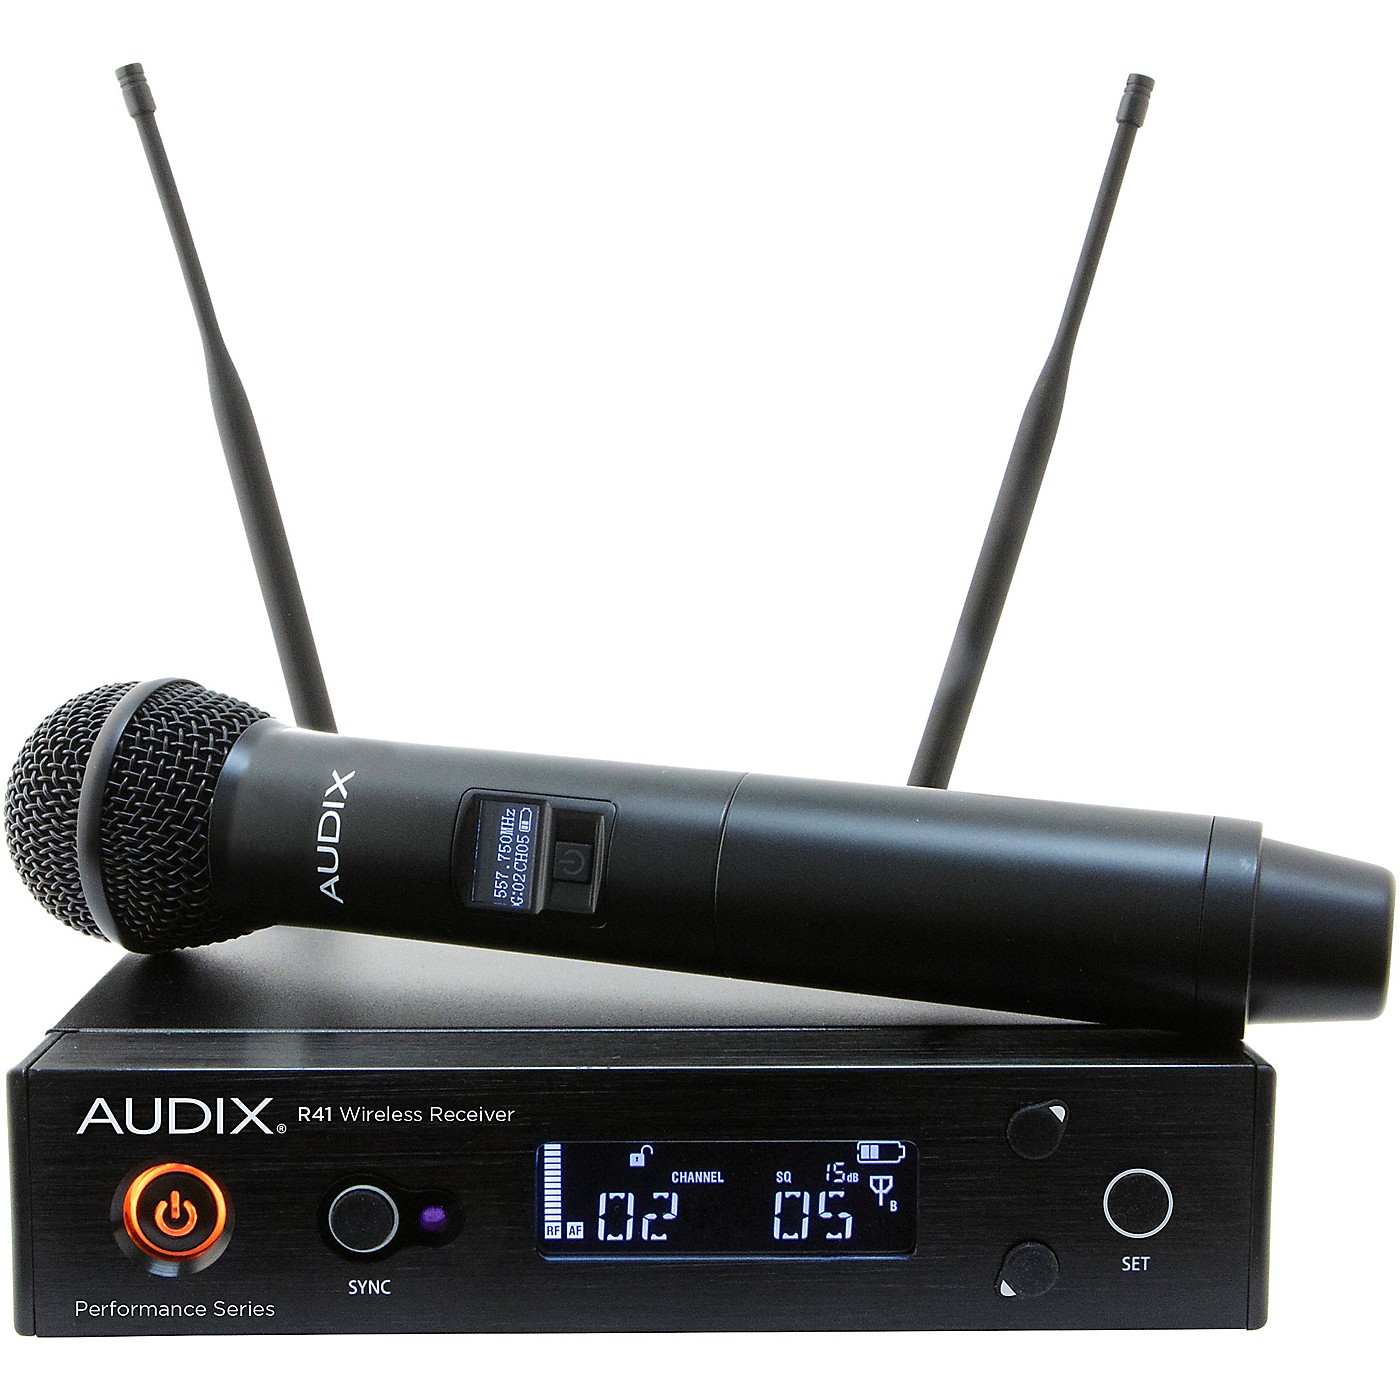 Audix AP41 OM5 Wireless Microphone System with R41 Diversity Receiver, B60 Bodypack and H60/OM5 Handheld Transmitter thumbnail